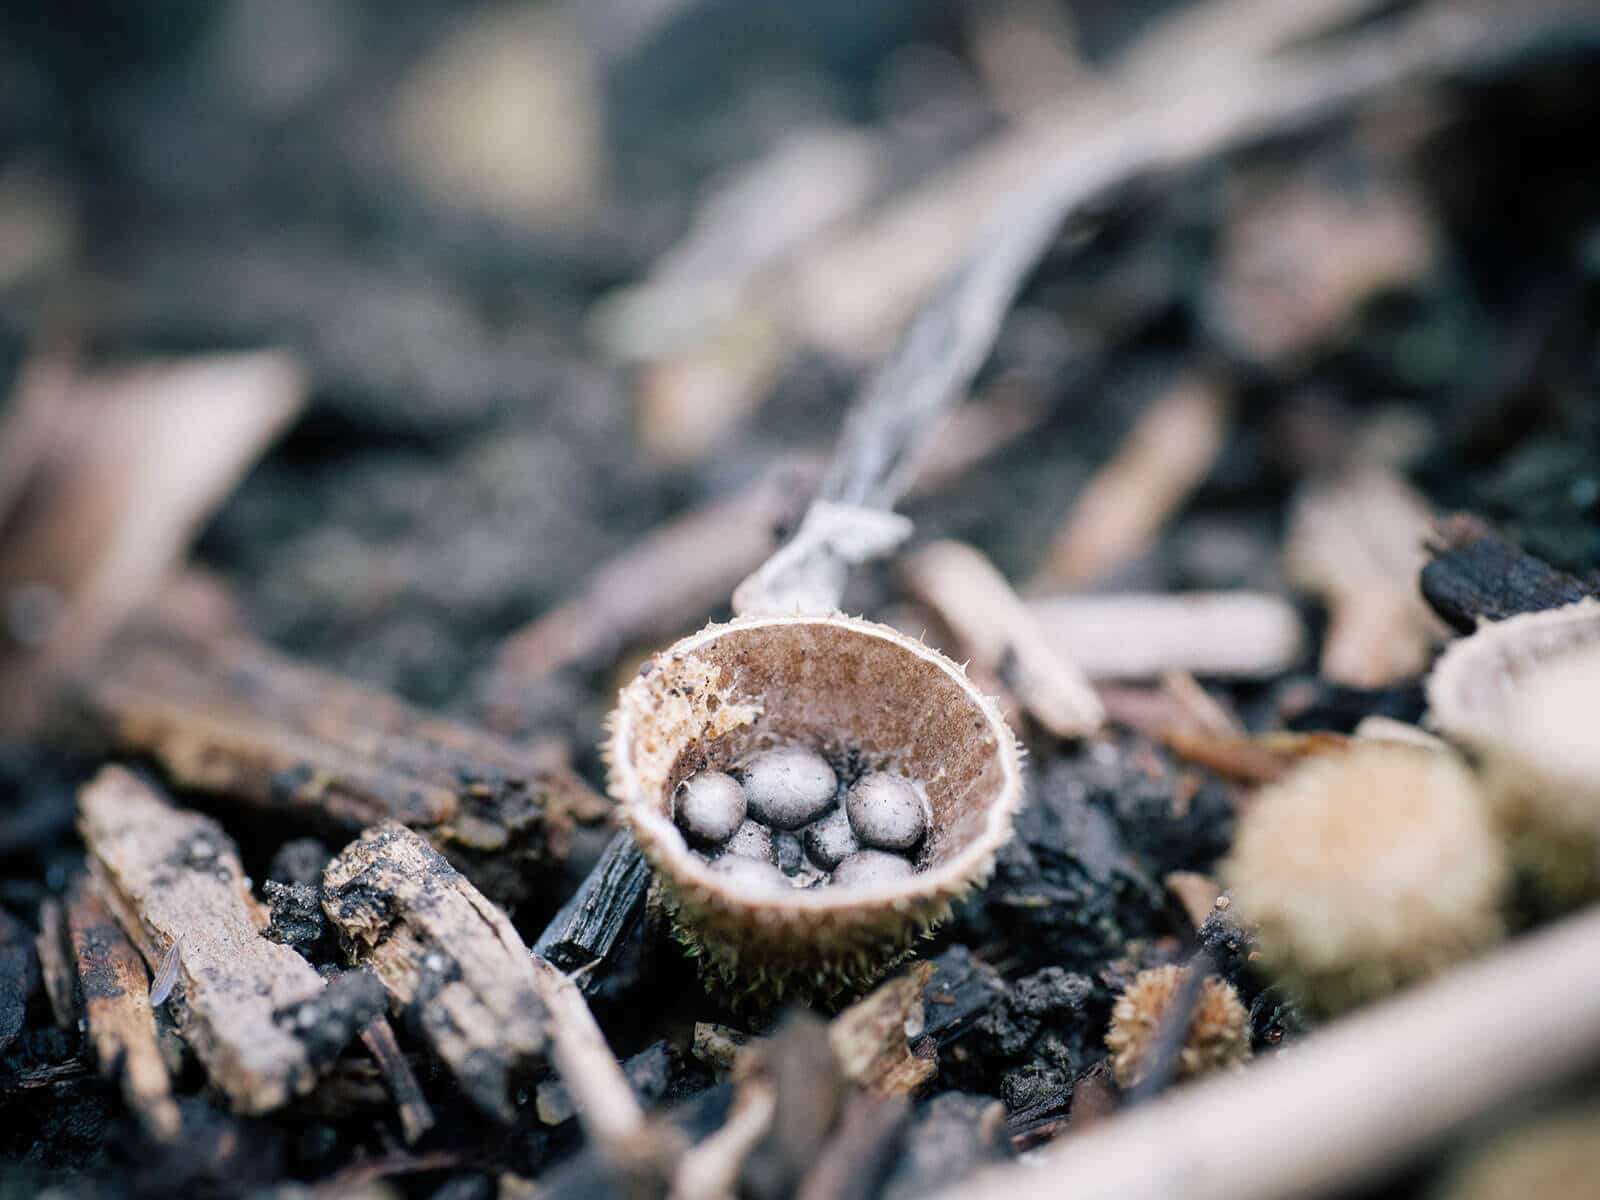 A bird's nest fungus cup with dark gray periodoles inside